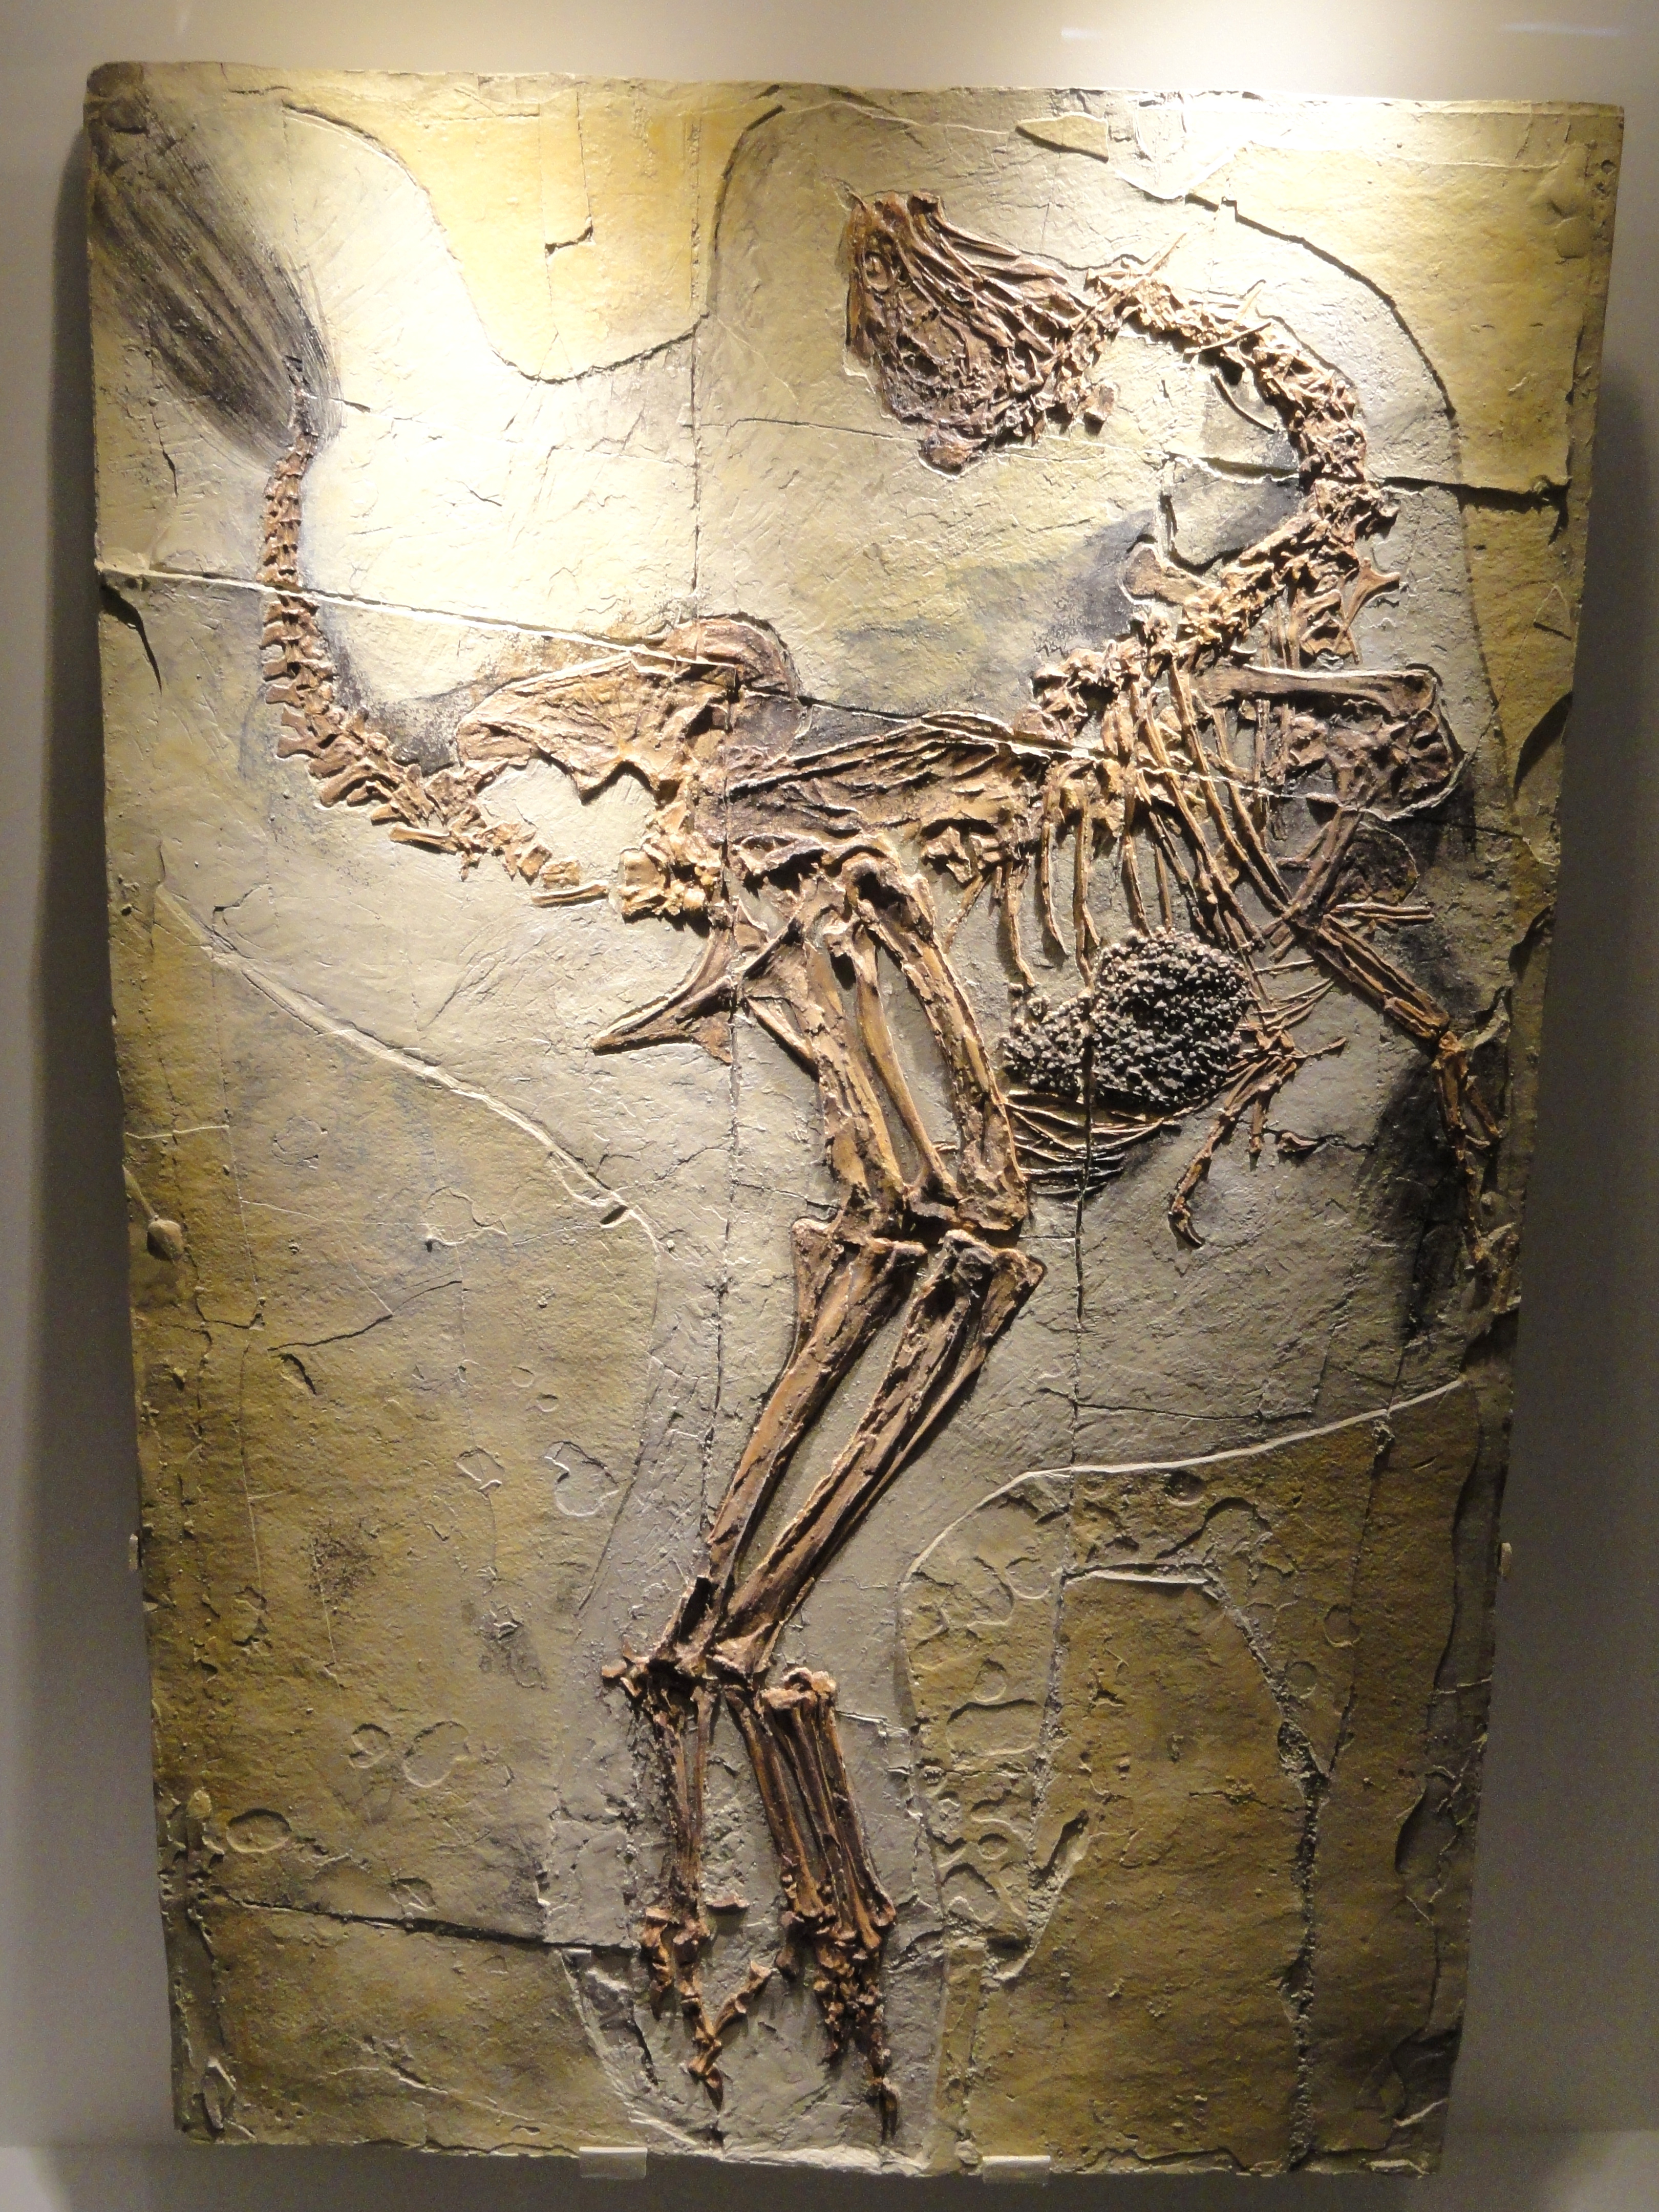 caudipteryx_zoui_feathered_dinosaur_plate_early_cretaceous_yixian_formation_liaoning_china_houston_museum_of_natural_science_dsc01866.JPG